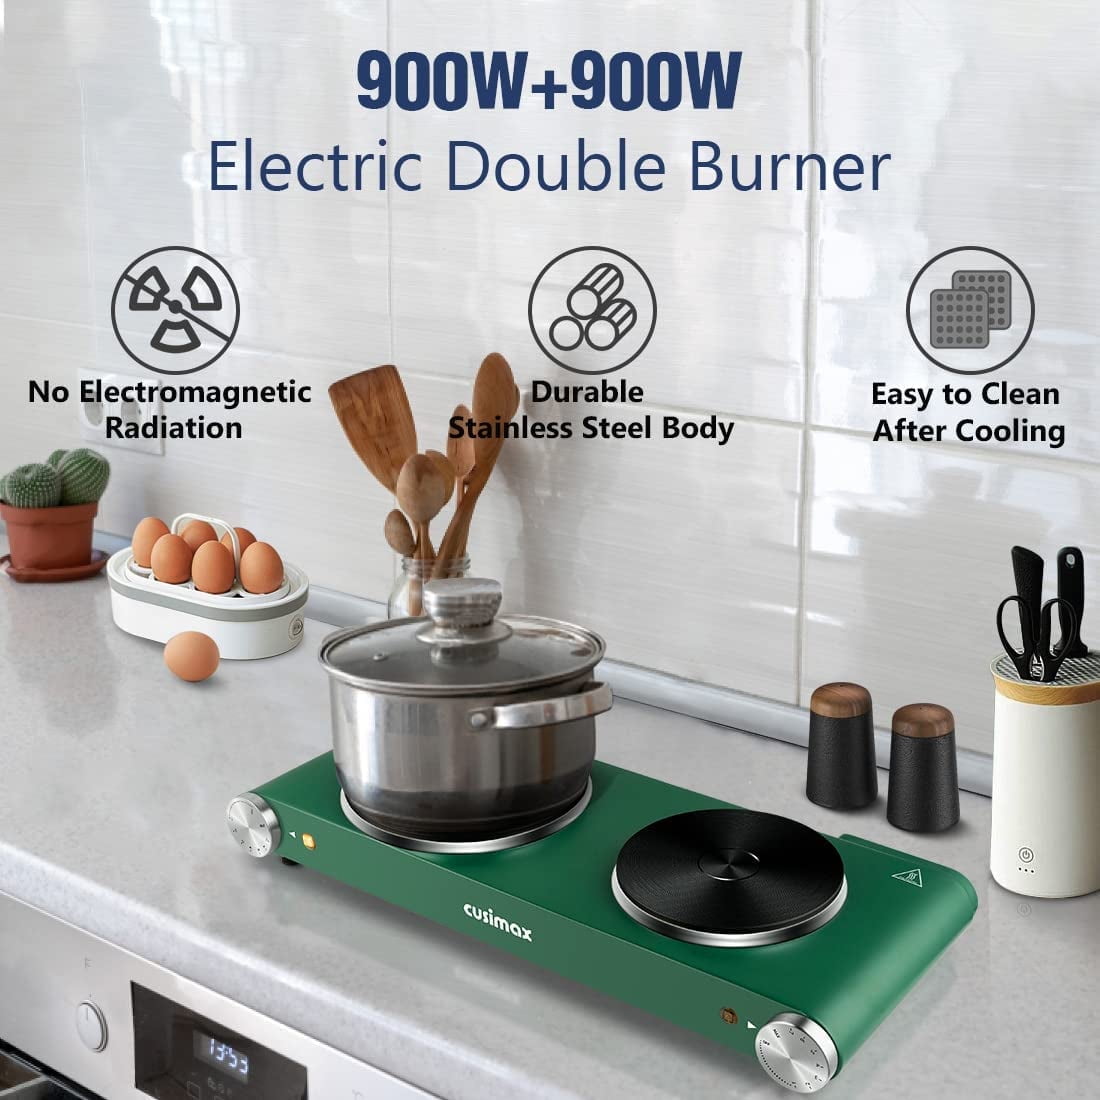 900W+900W Double Hot Plates, Cast Iron hot plates, Electric Cooktop, Hot  Plates for Cooking Portable Electric Double Burner, Black Stainless Steel  Countertop Burner, Easy to Clean-Upgraded Version 